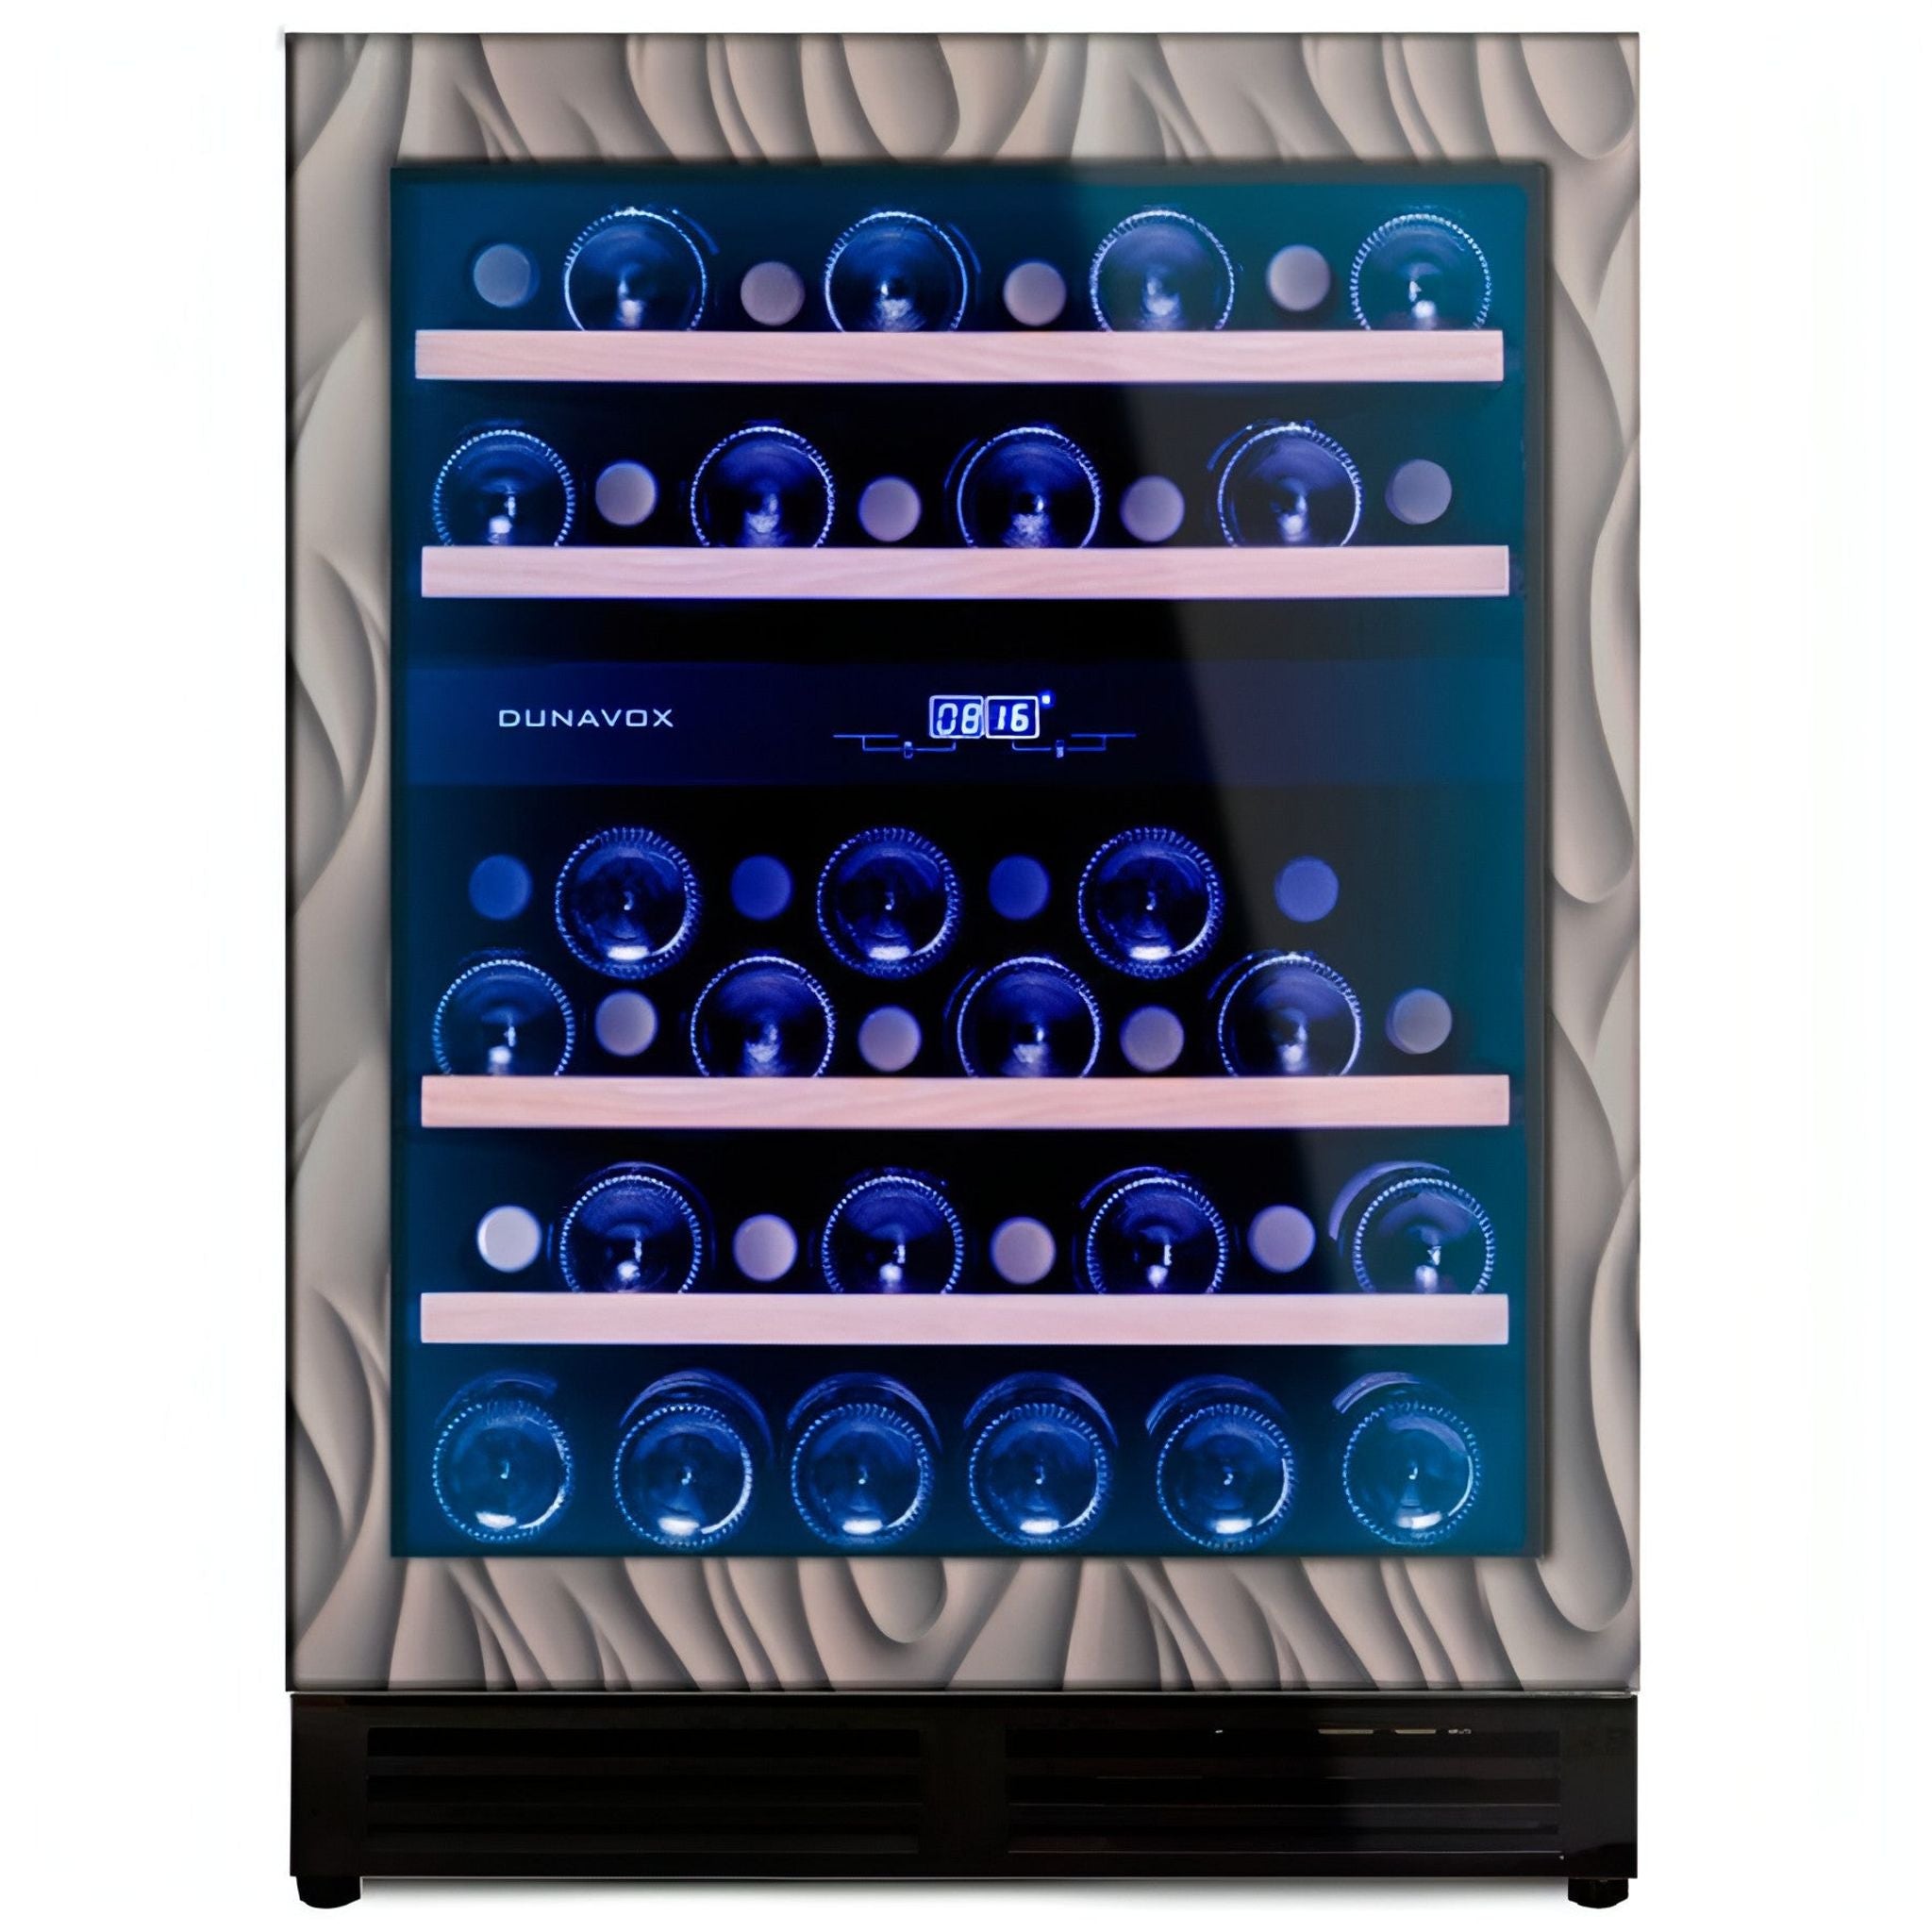 Dunavox FLOW-45 - 600mm Dual Zone - 45 Bottle - Fully Integrated Undercounter Wine Cooler - DAUF-45.125DOP.TO 88cm height